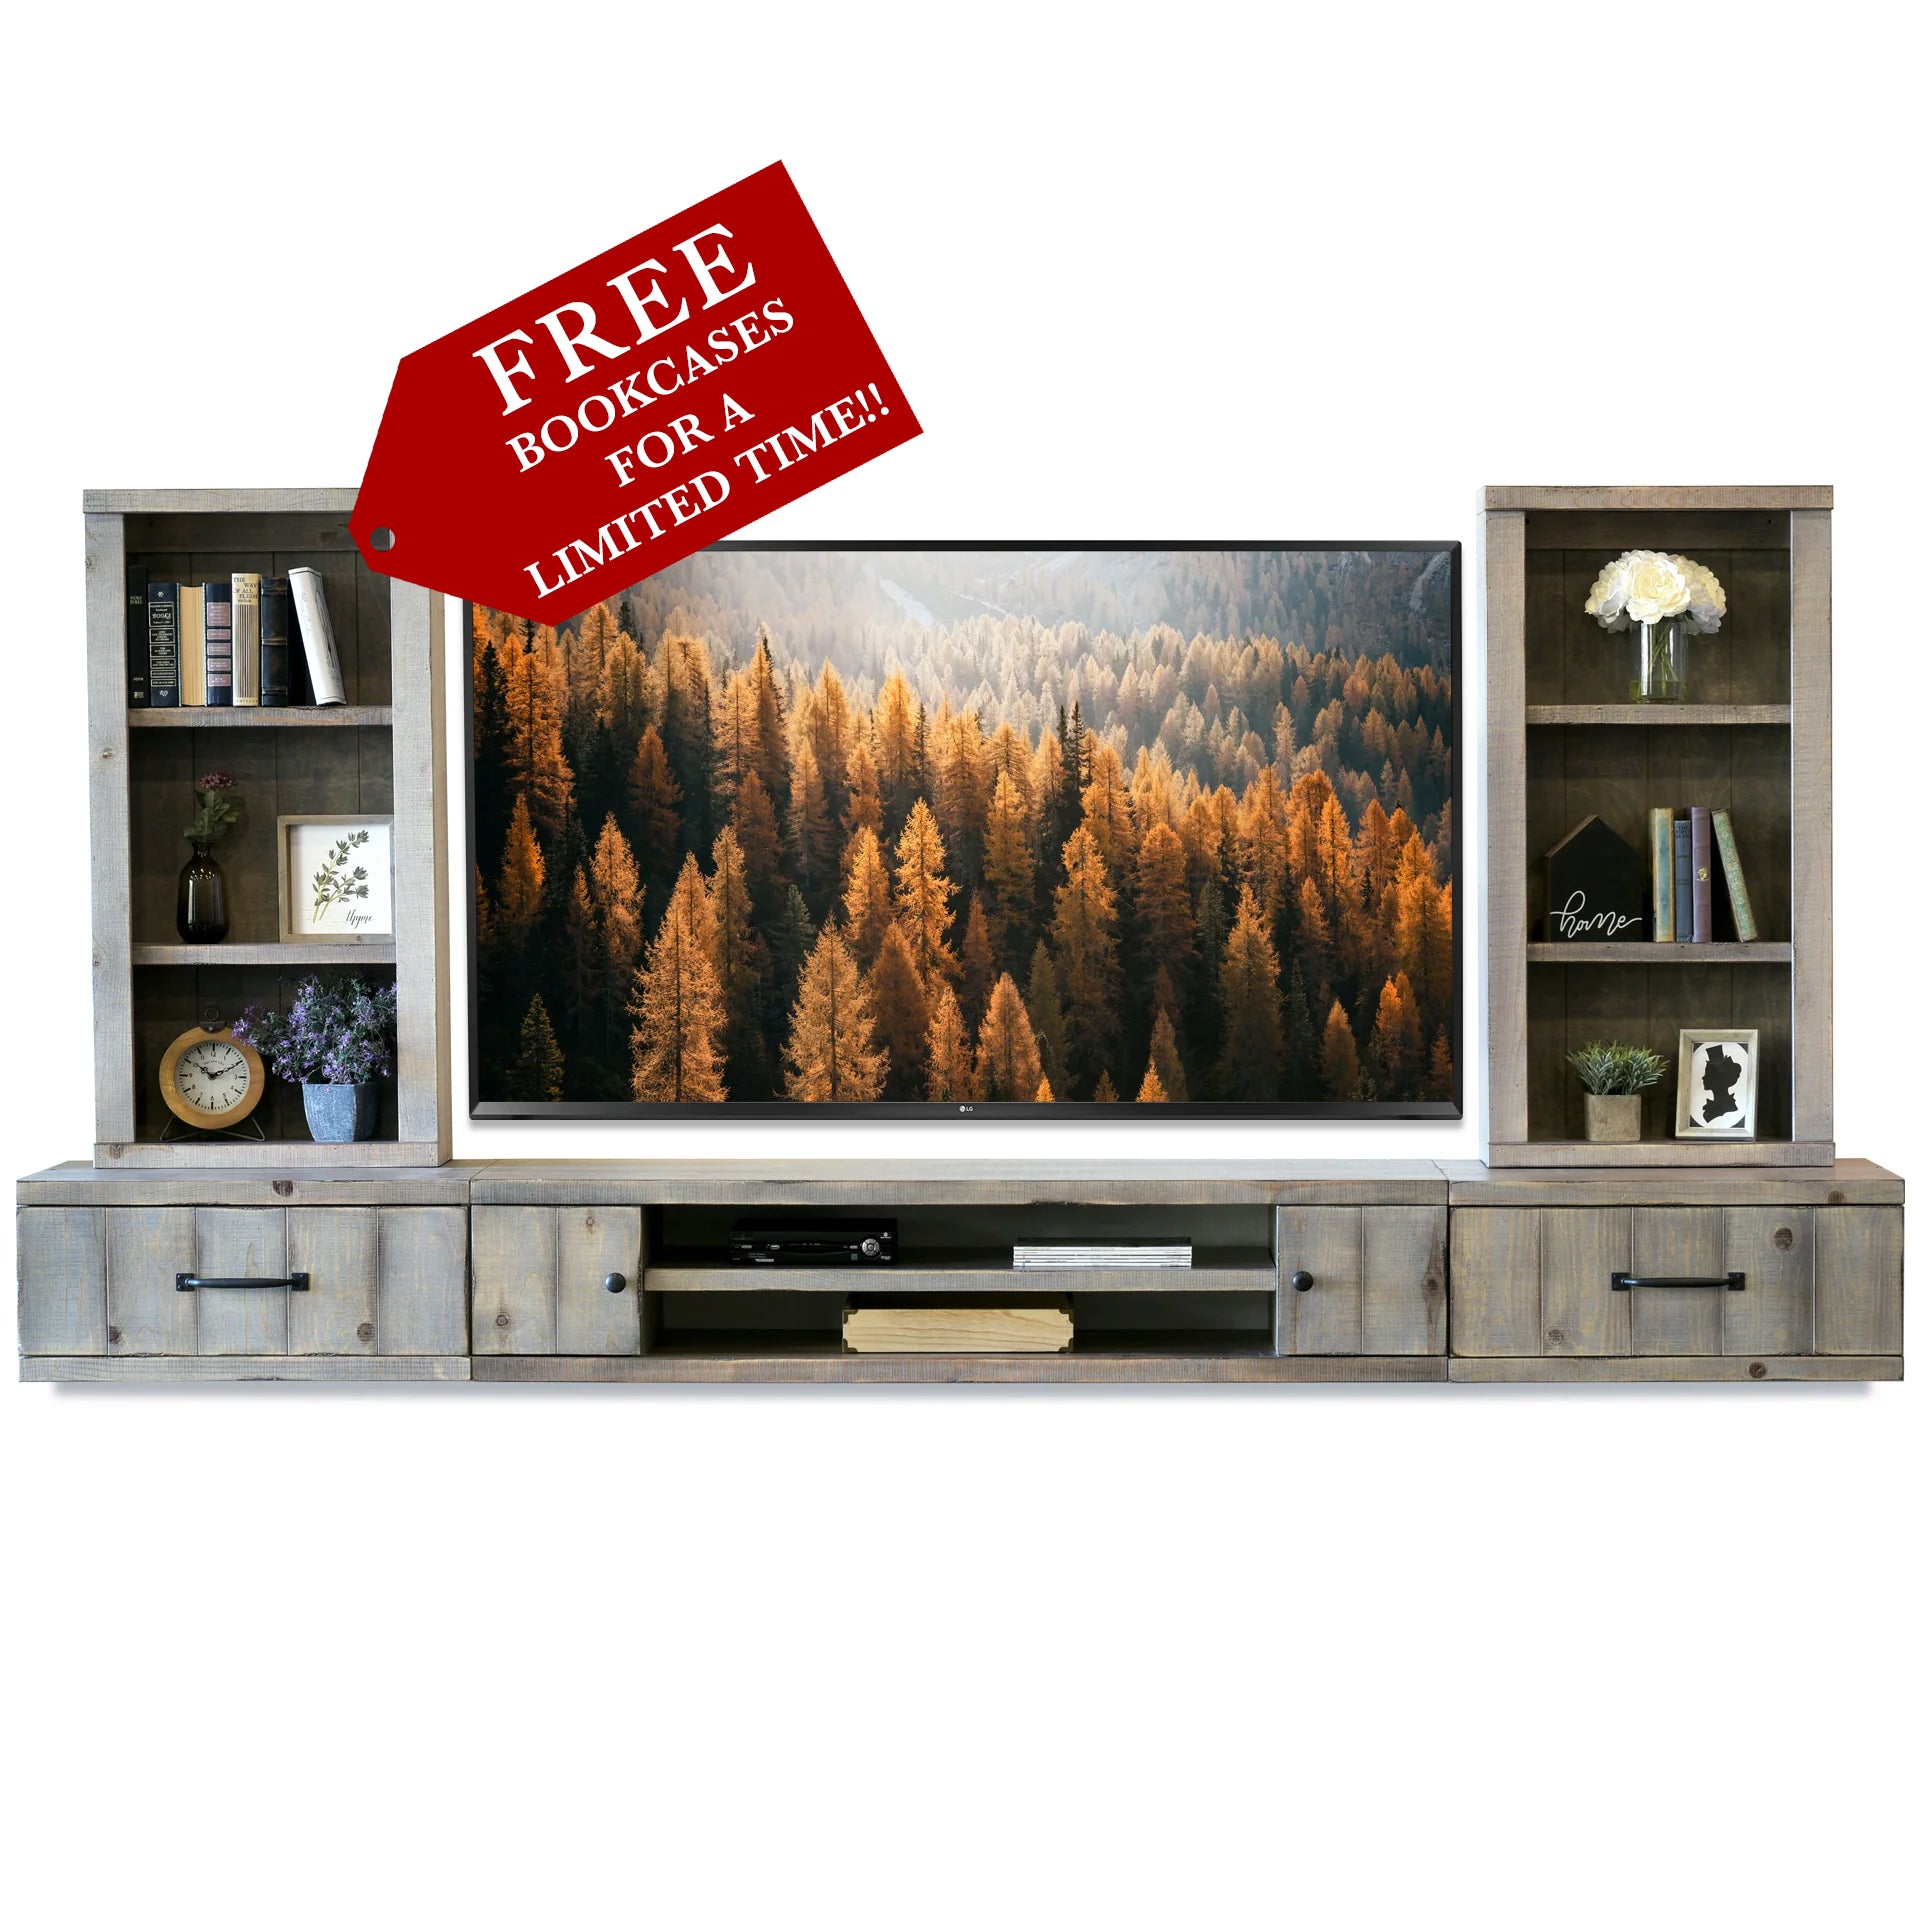 Floating TV Stand - Woodwaves - Rustic Wood Floating Entertainment Center - Farmhouse Collection - Lakewood Gray